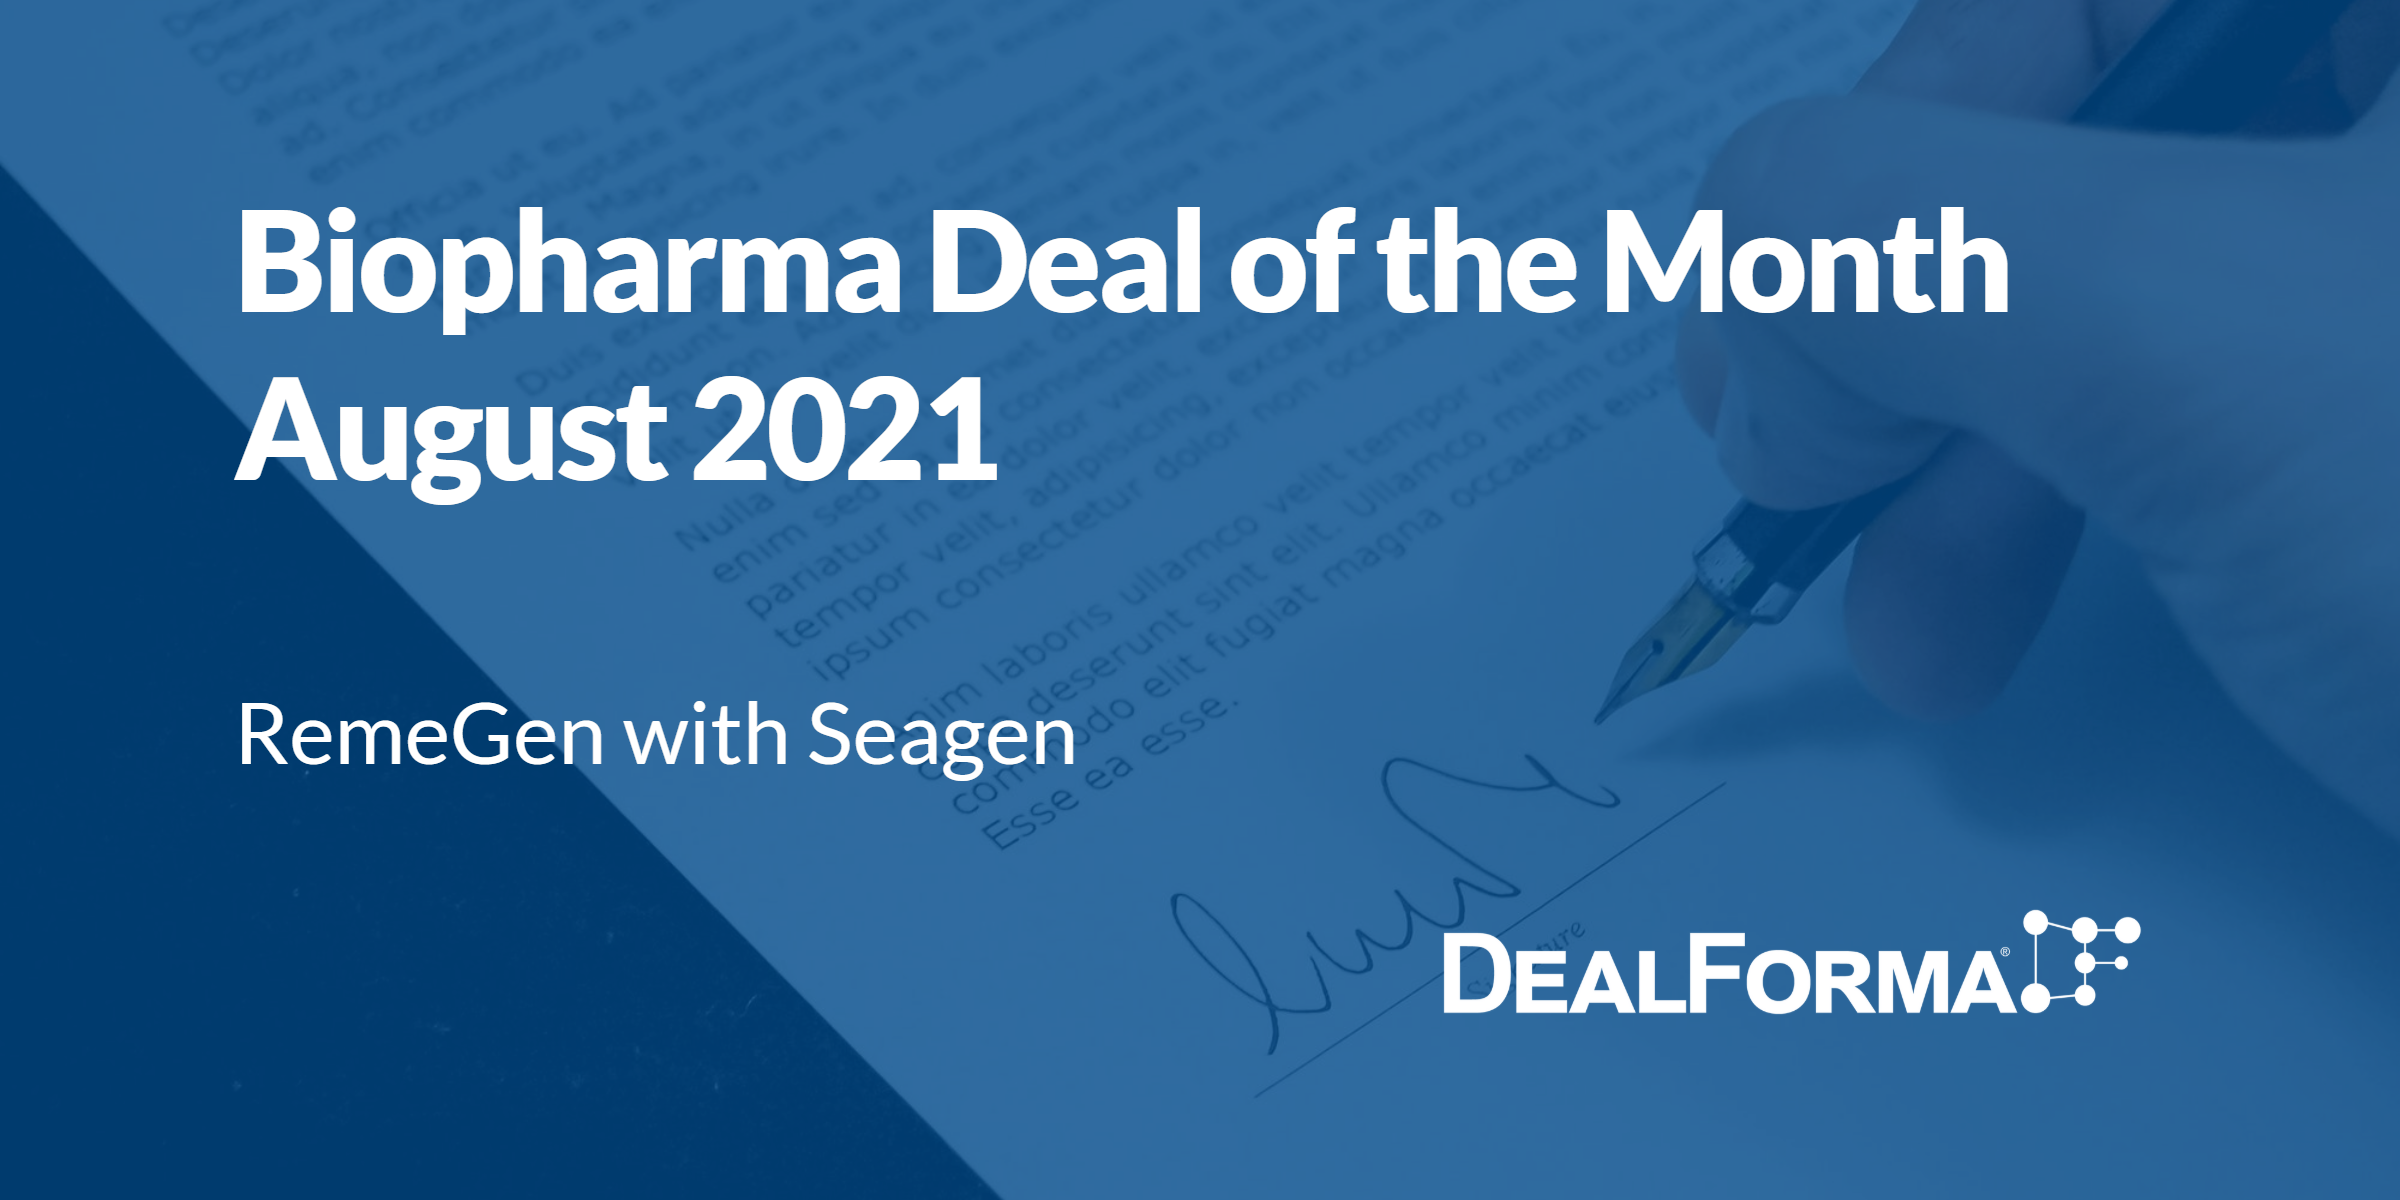 Top biopharma deal upfront August 2021